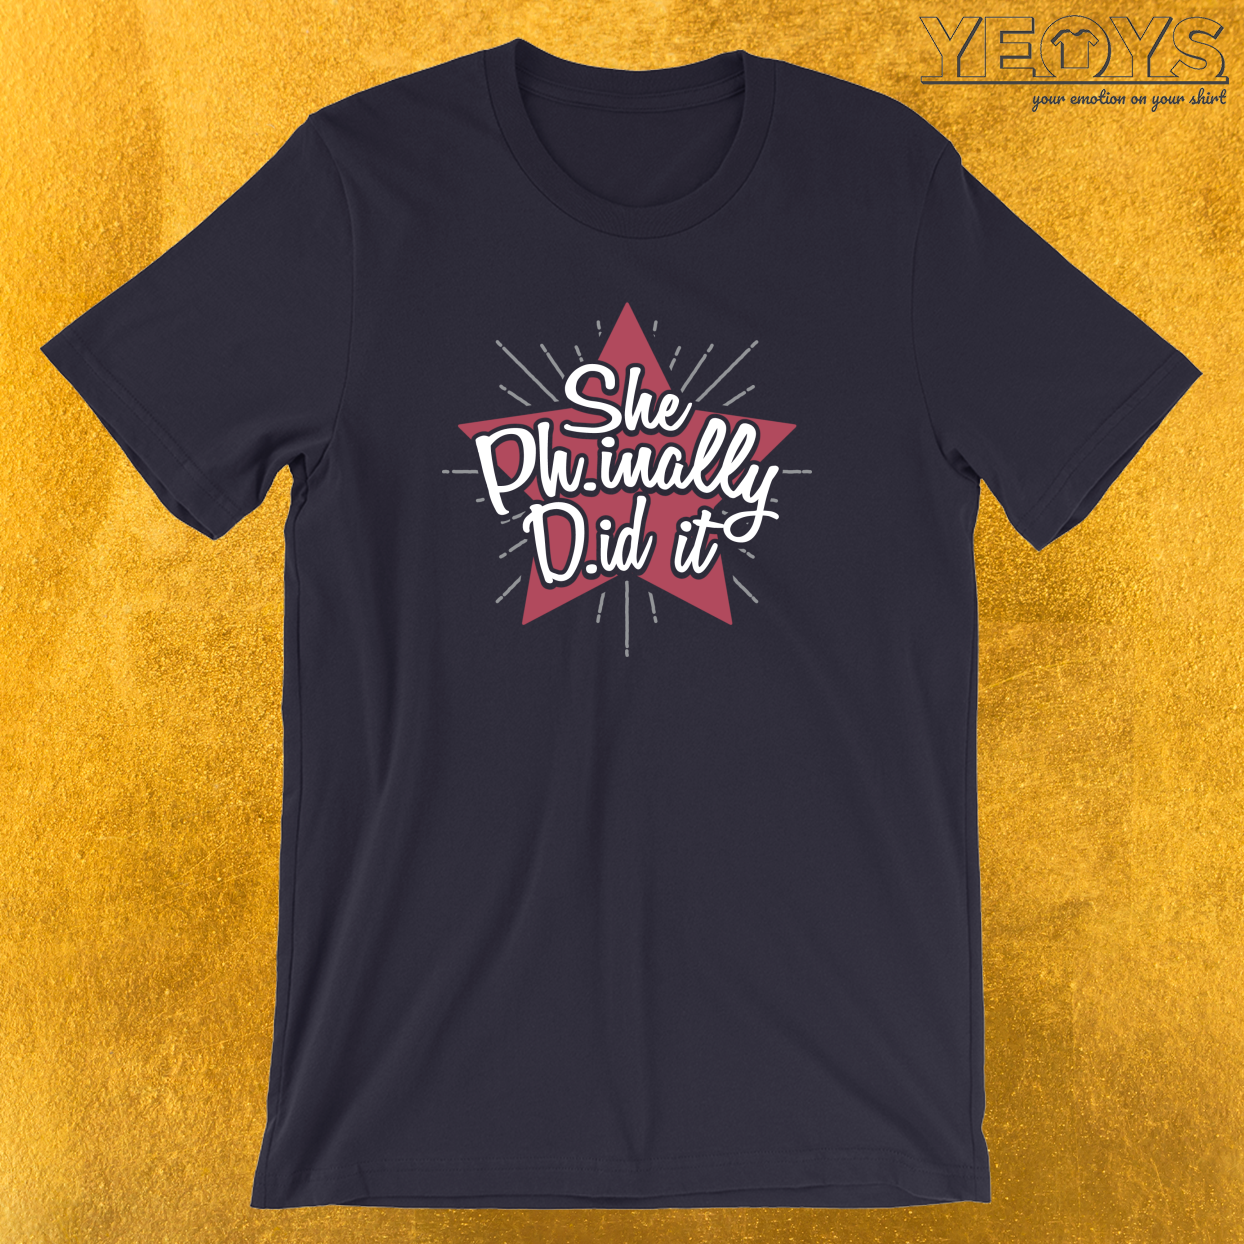 She Phinally Did it! T-Shirt